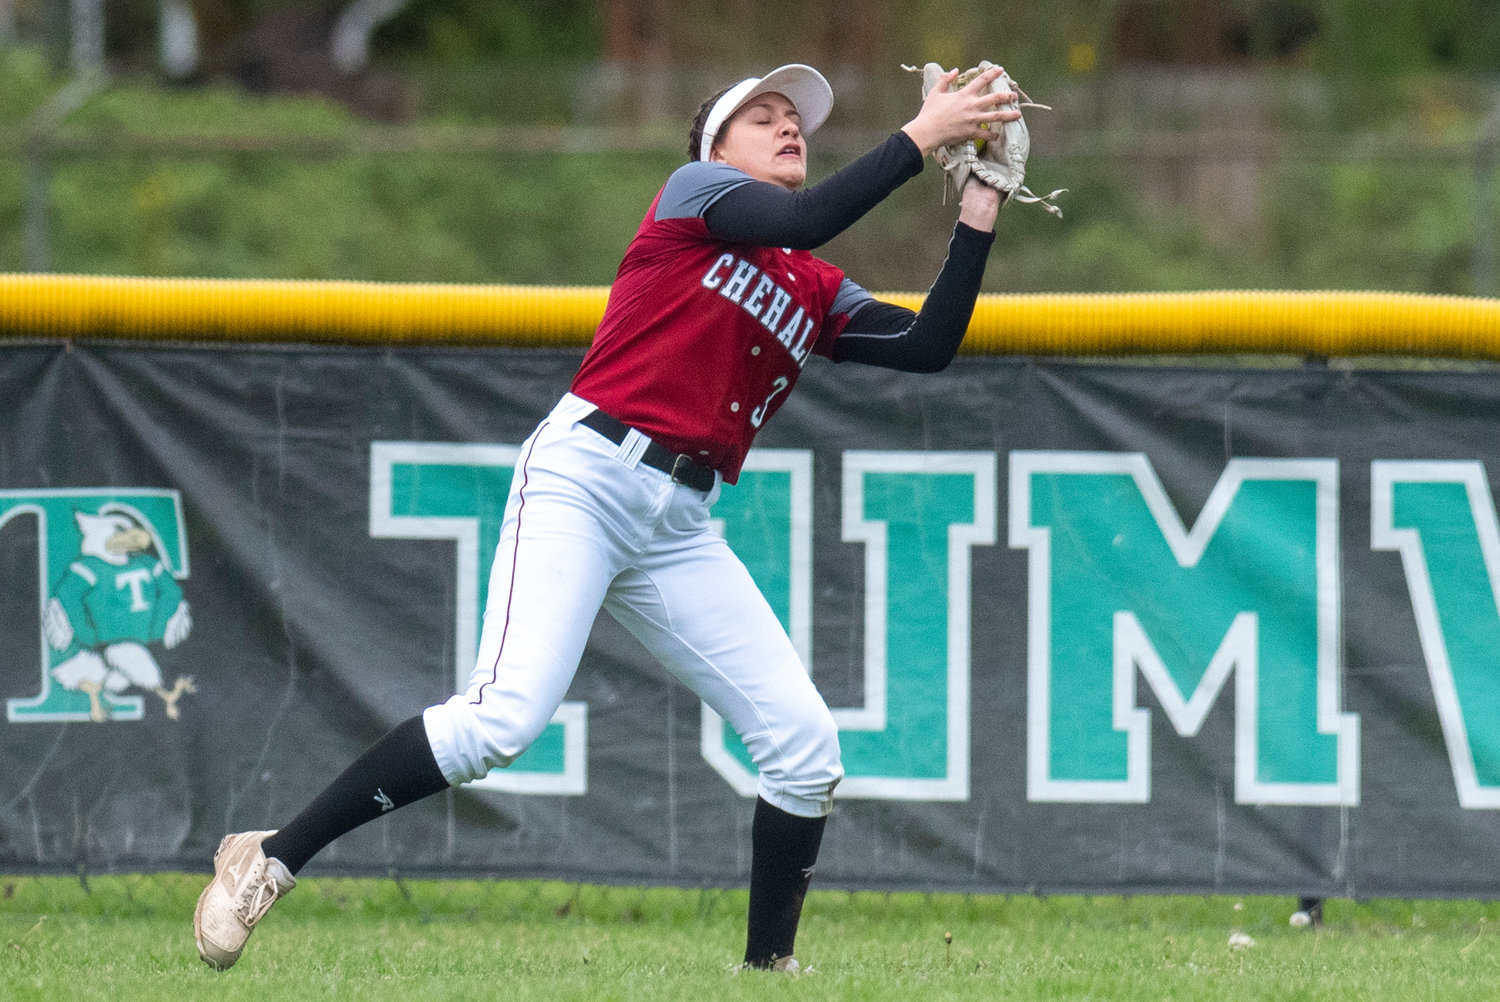 W.F. West left fielder Chase White makes a catch against Tumwater during a road game on May 2.